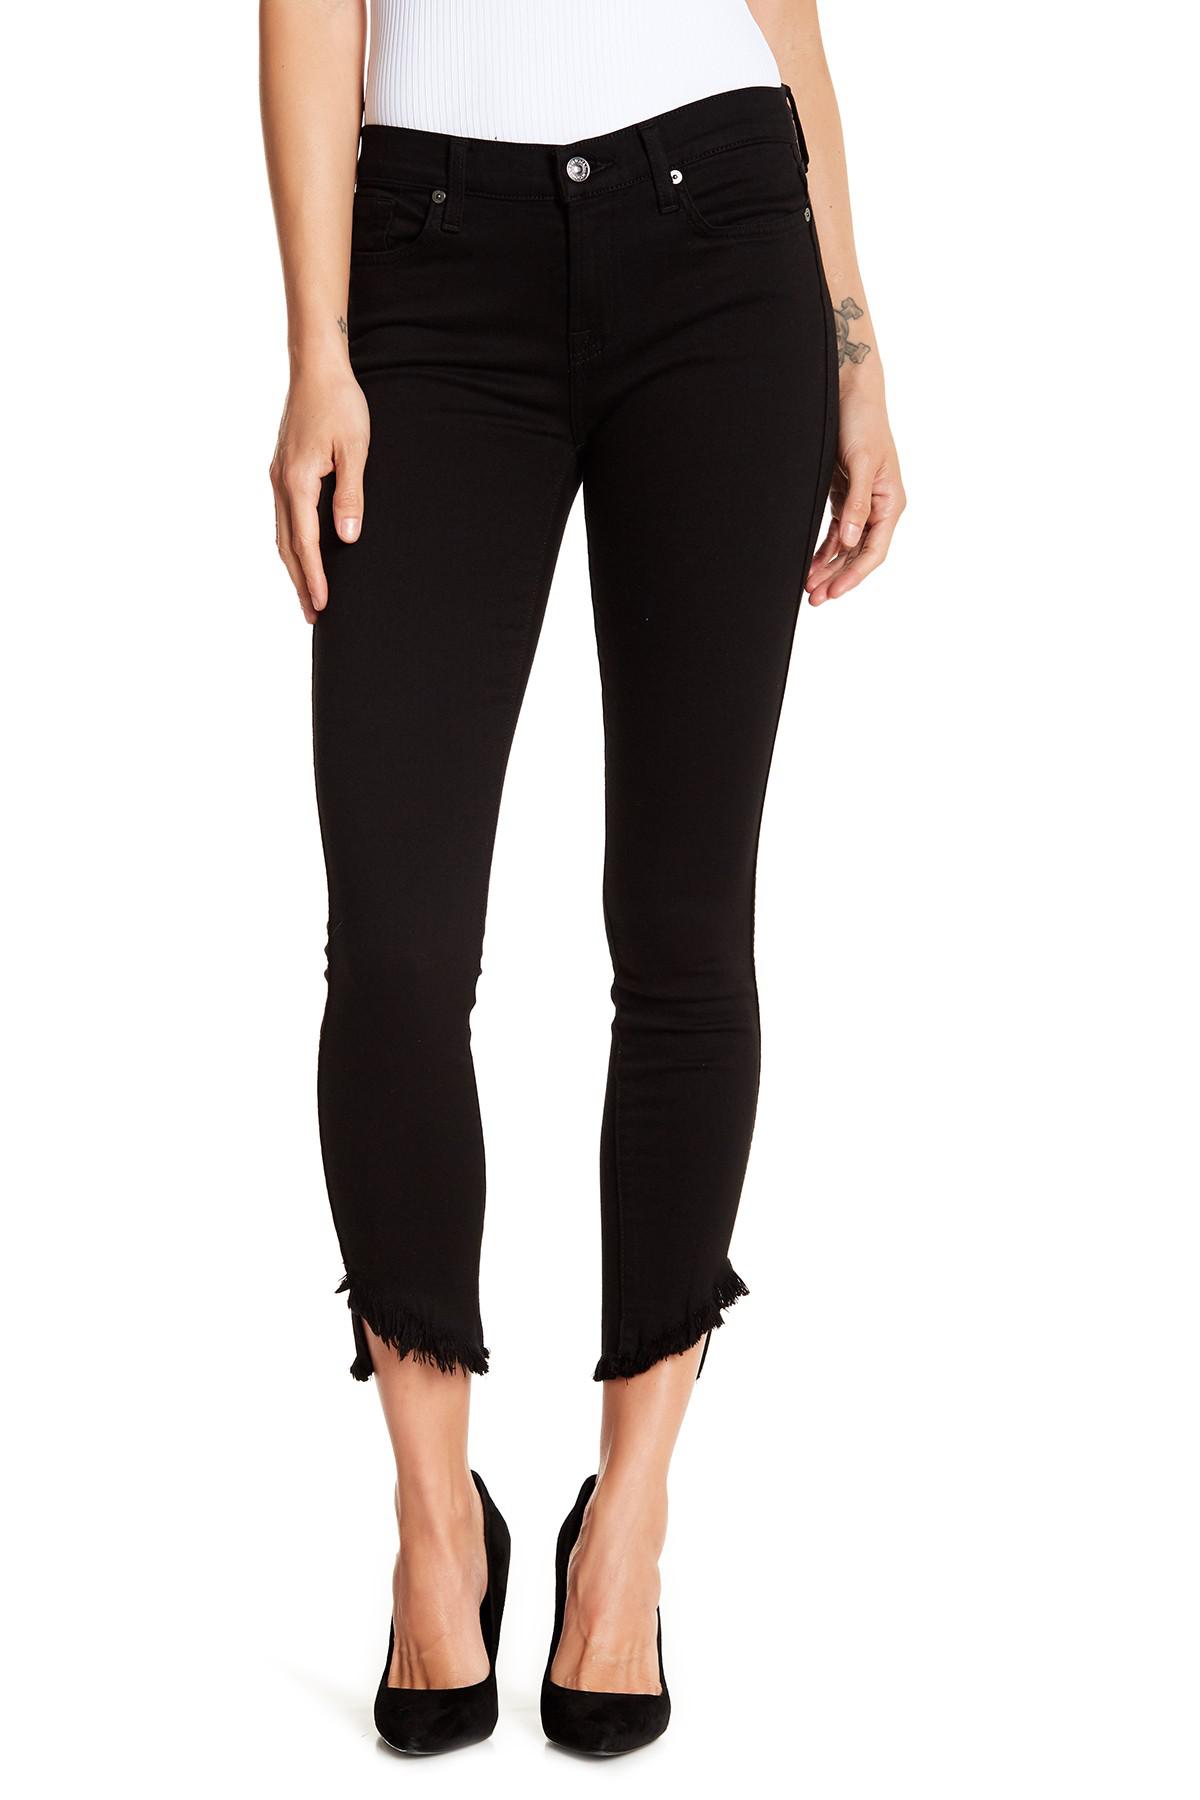 7 For All Mankind Gwen Angled Hem Skinny Jeans in Lyst